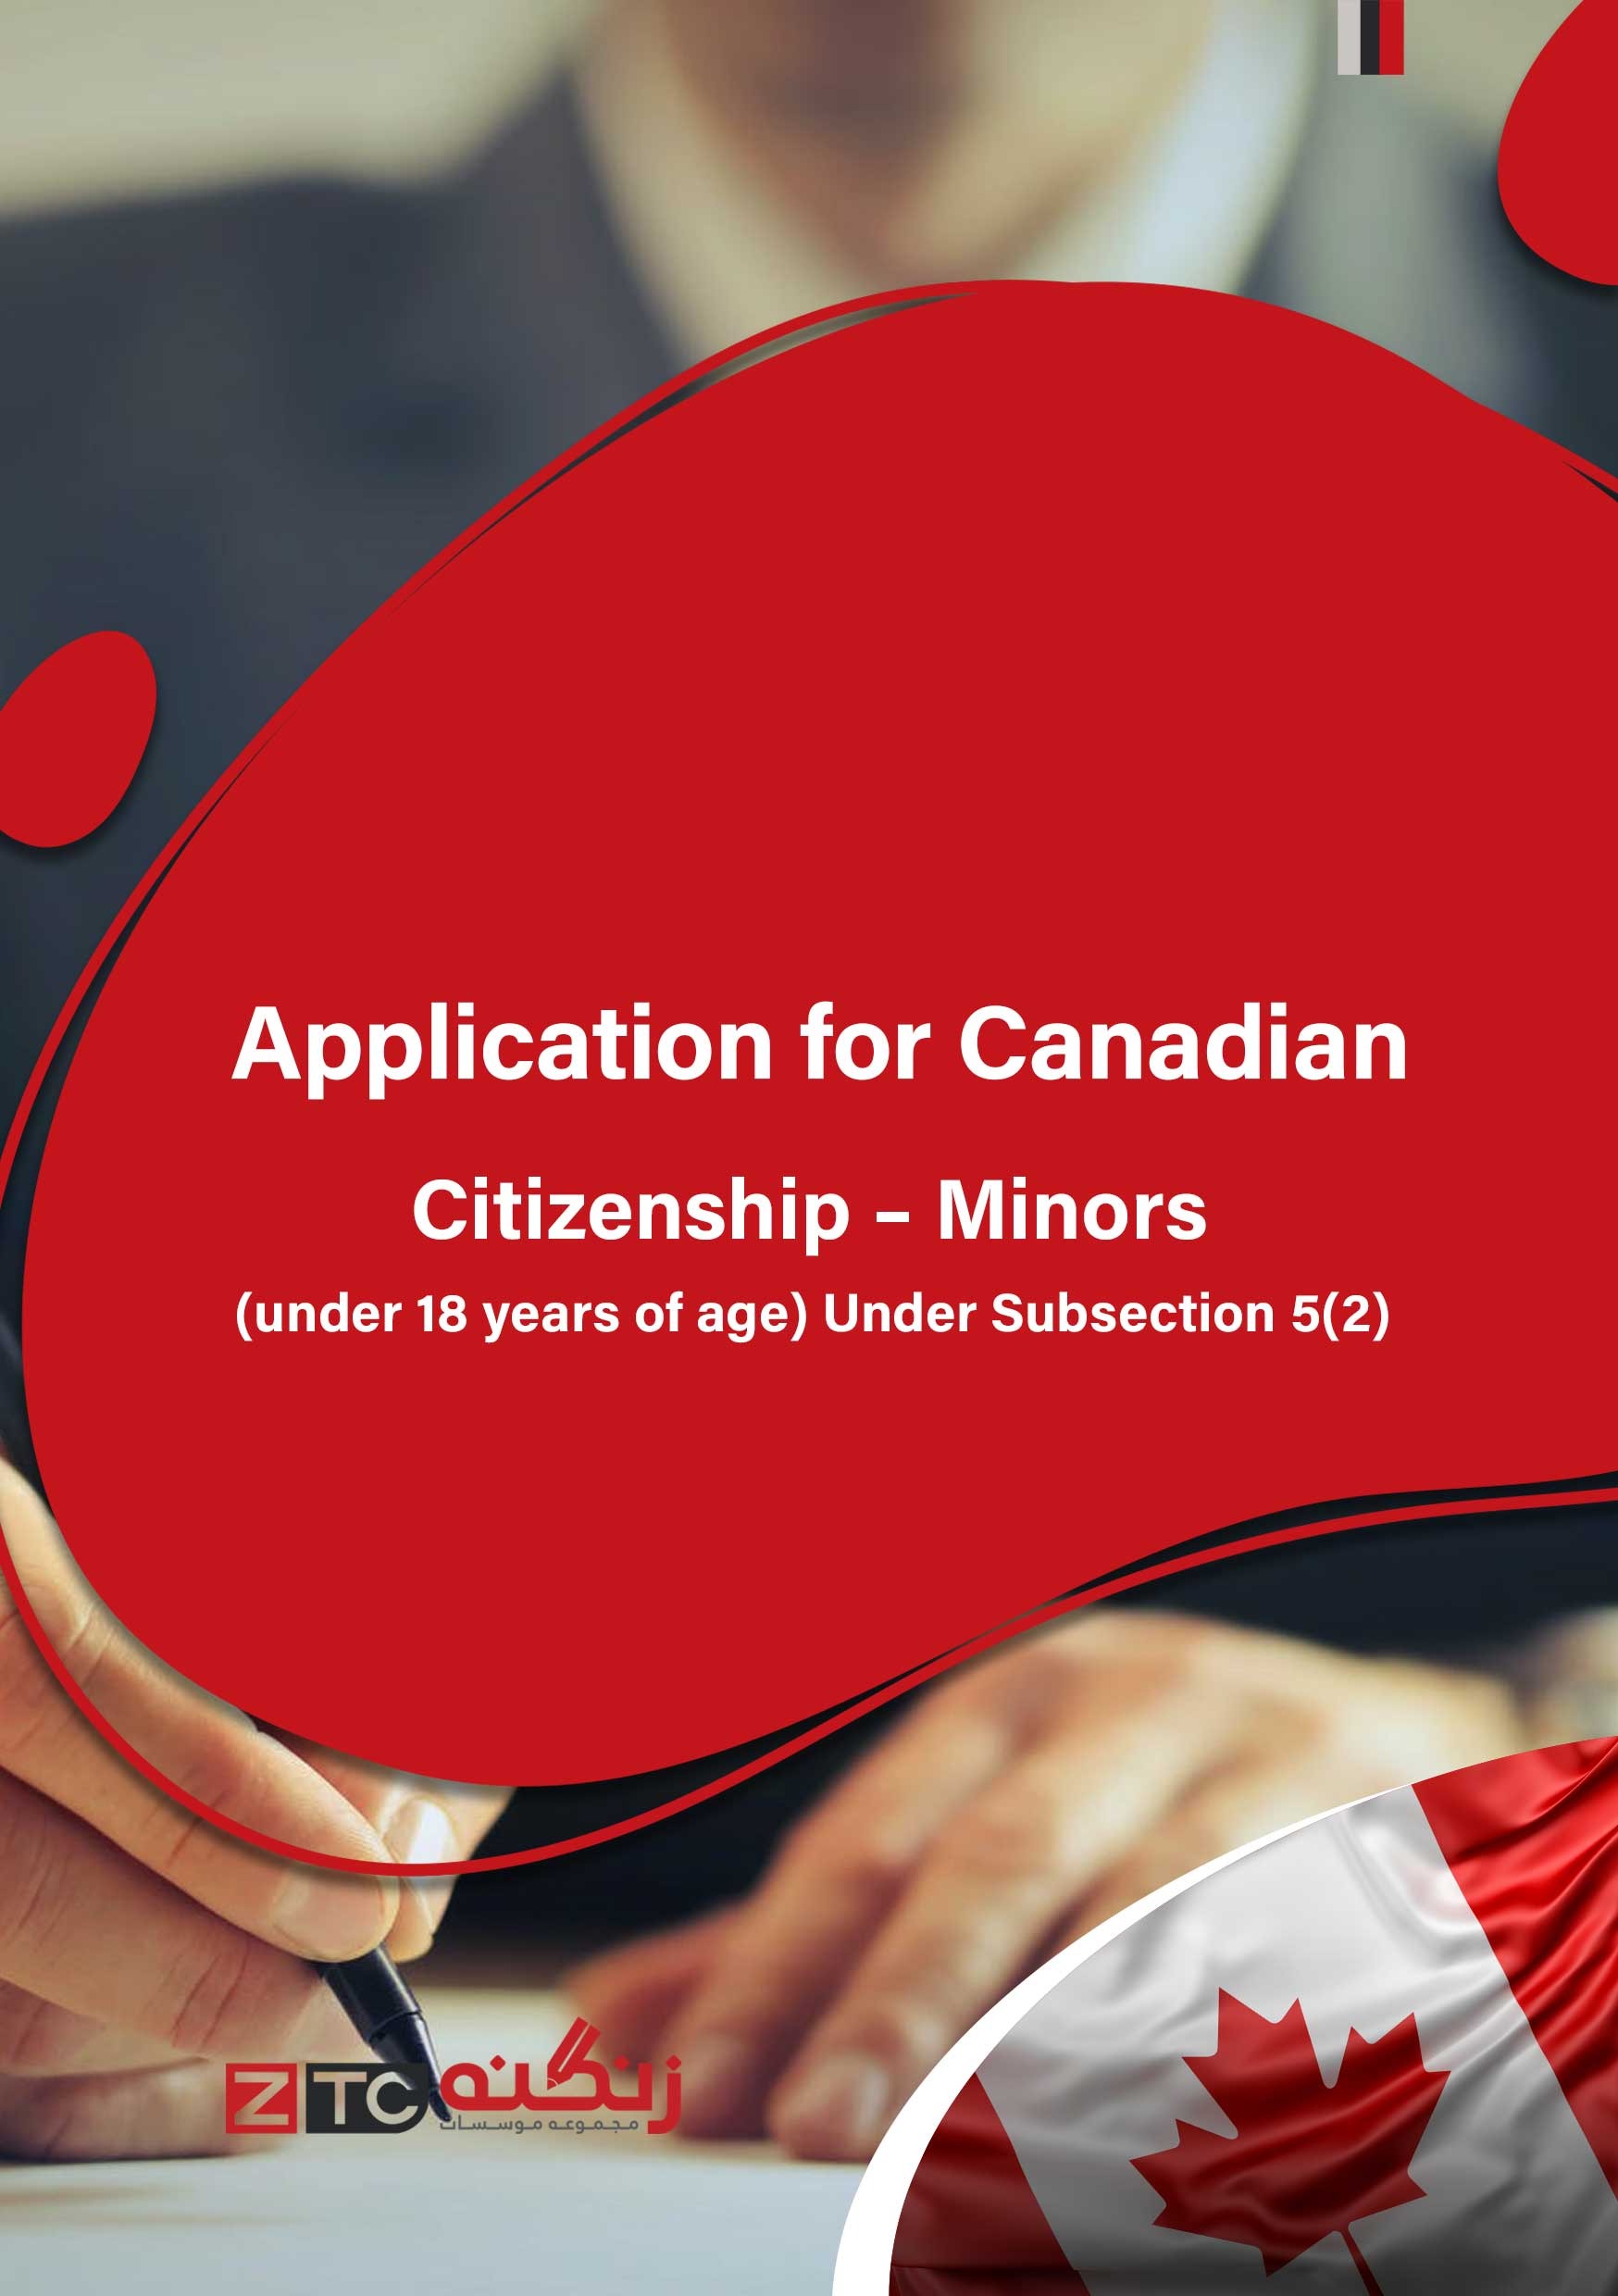 Application for Canadian Citizenship – Minors (under 18 years of age) Under Subsection 5(2)